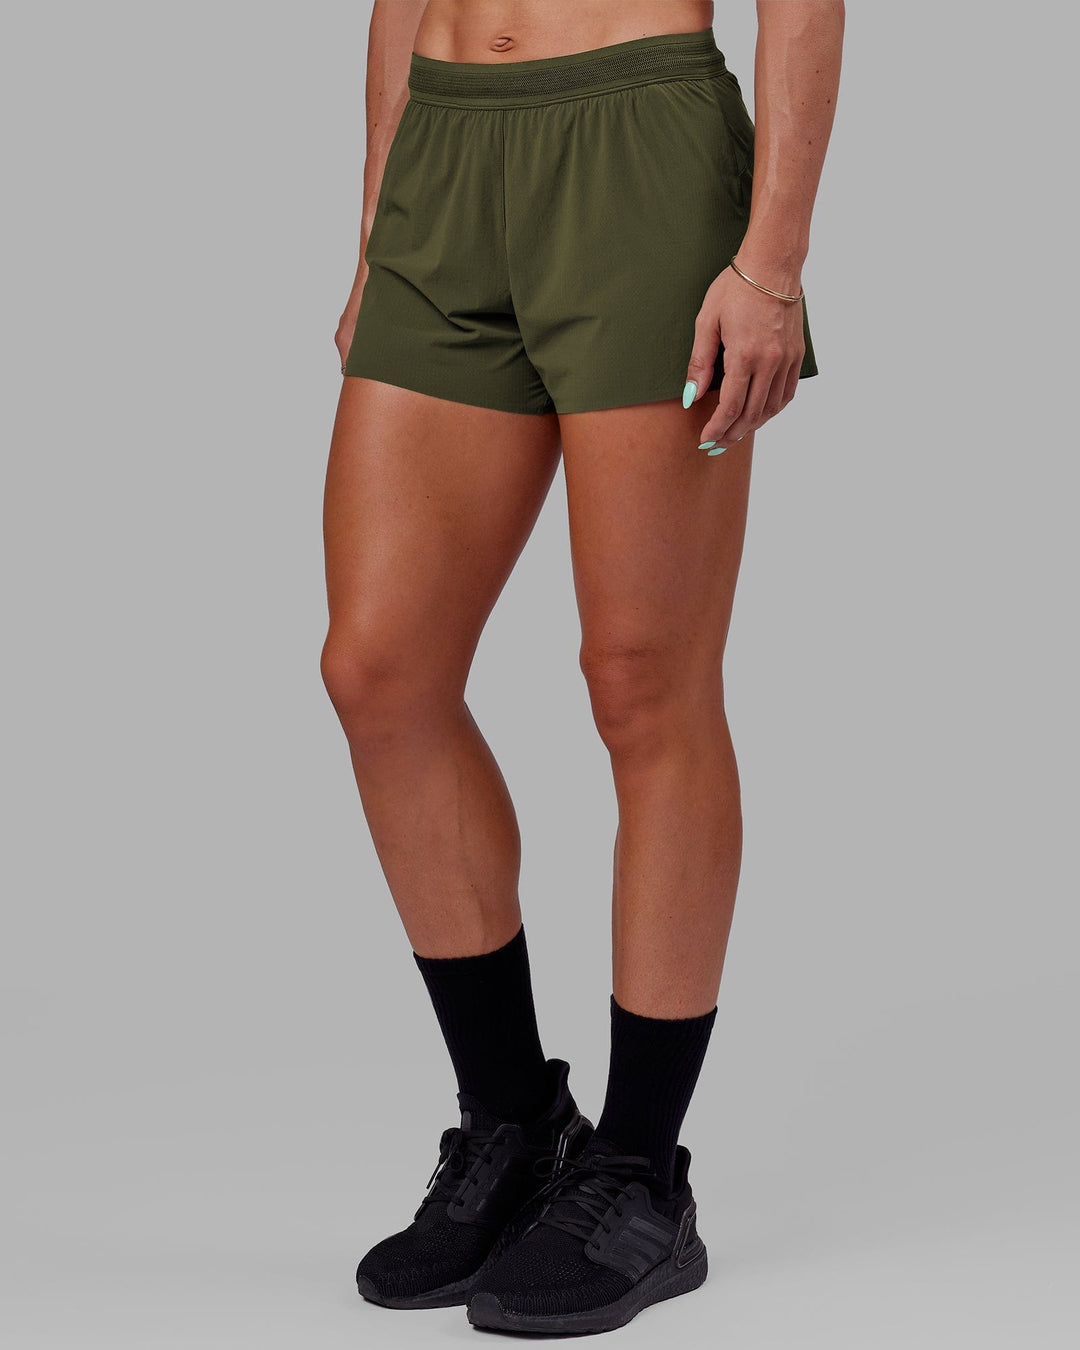 Womanw earing Ultra Air Lined Performance Short - Forest Night